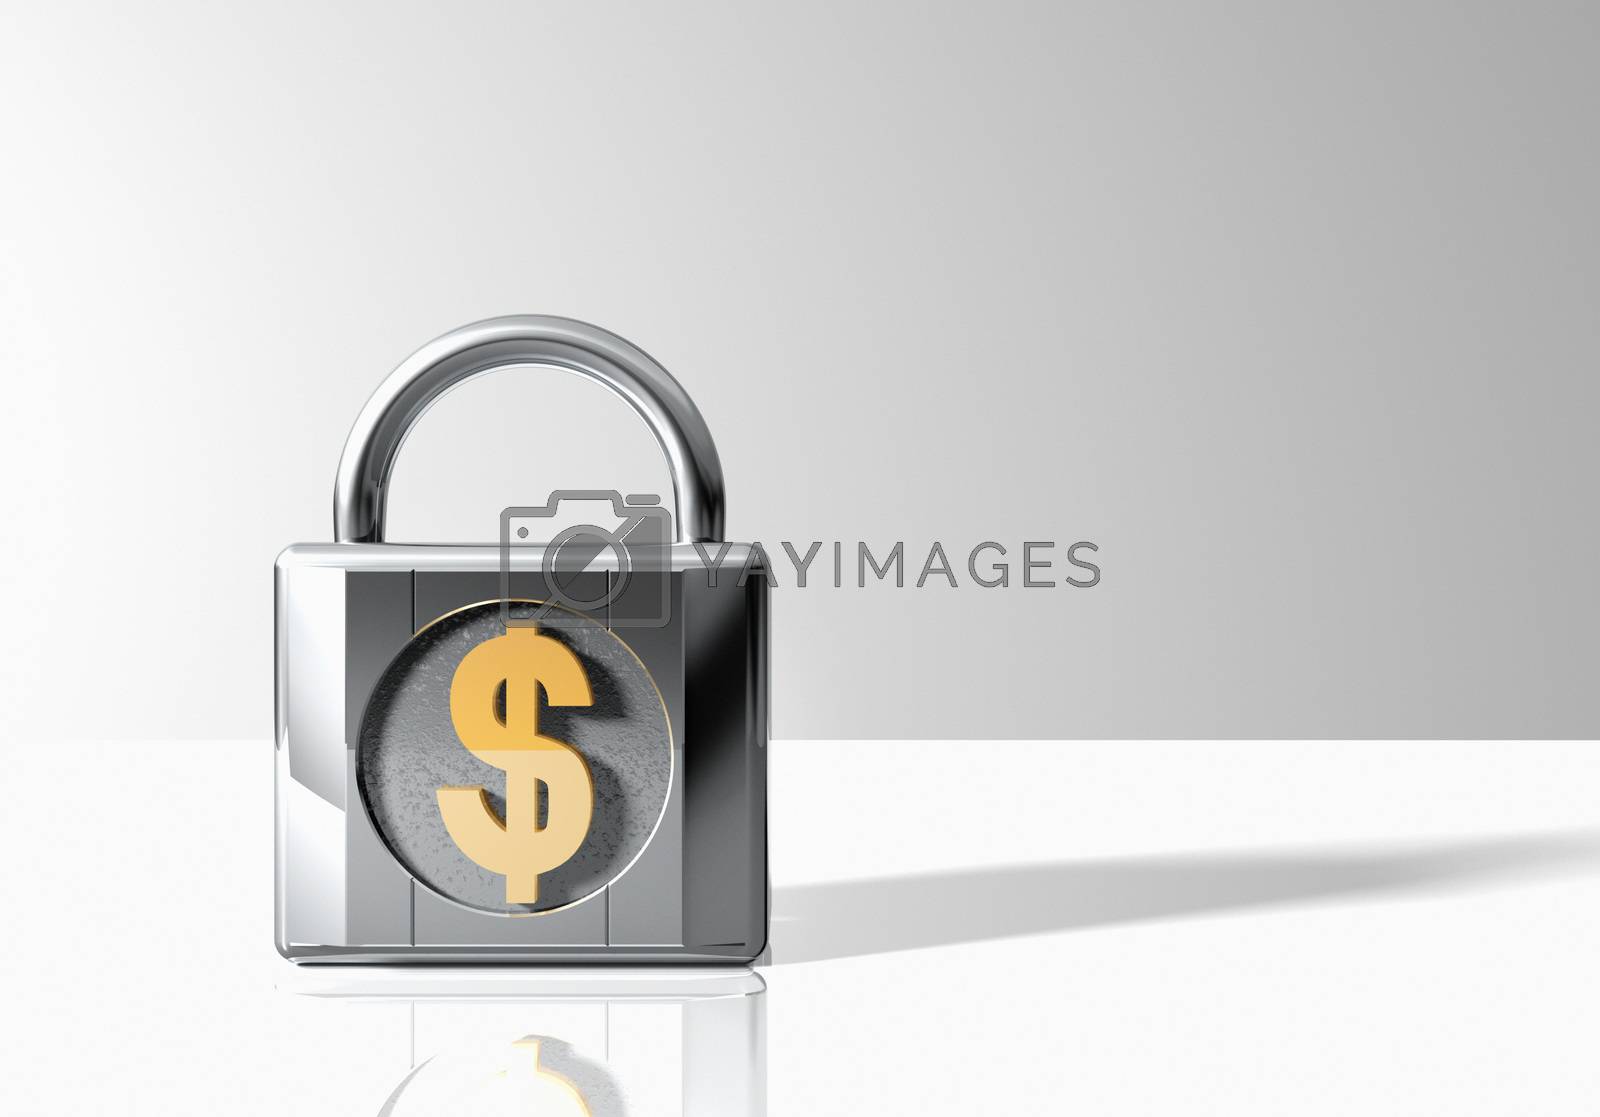 Royalty free image of Padlock with dollar sign by moodboard